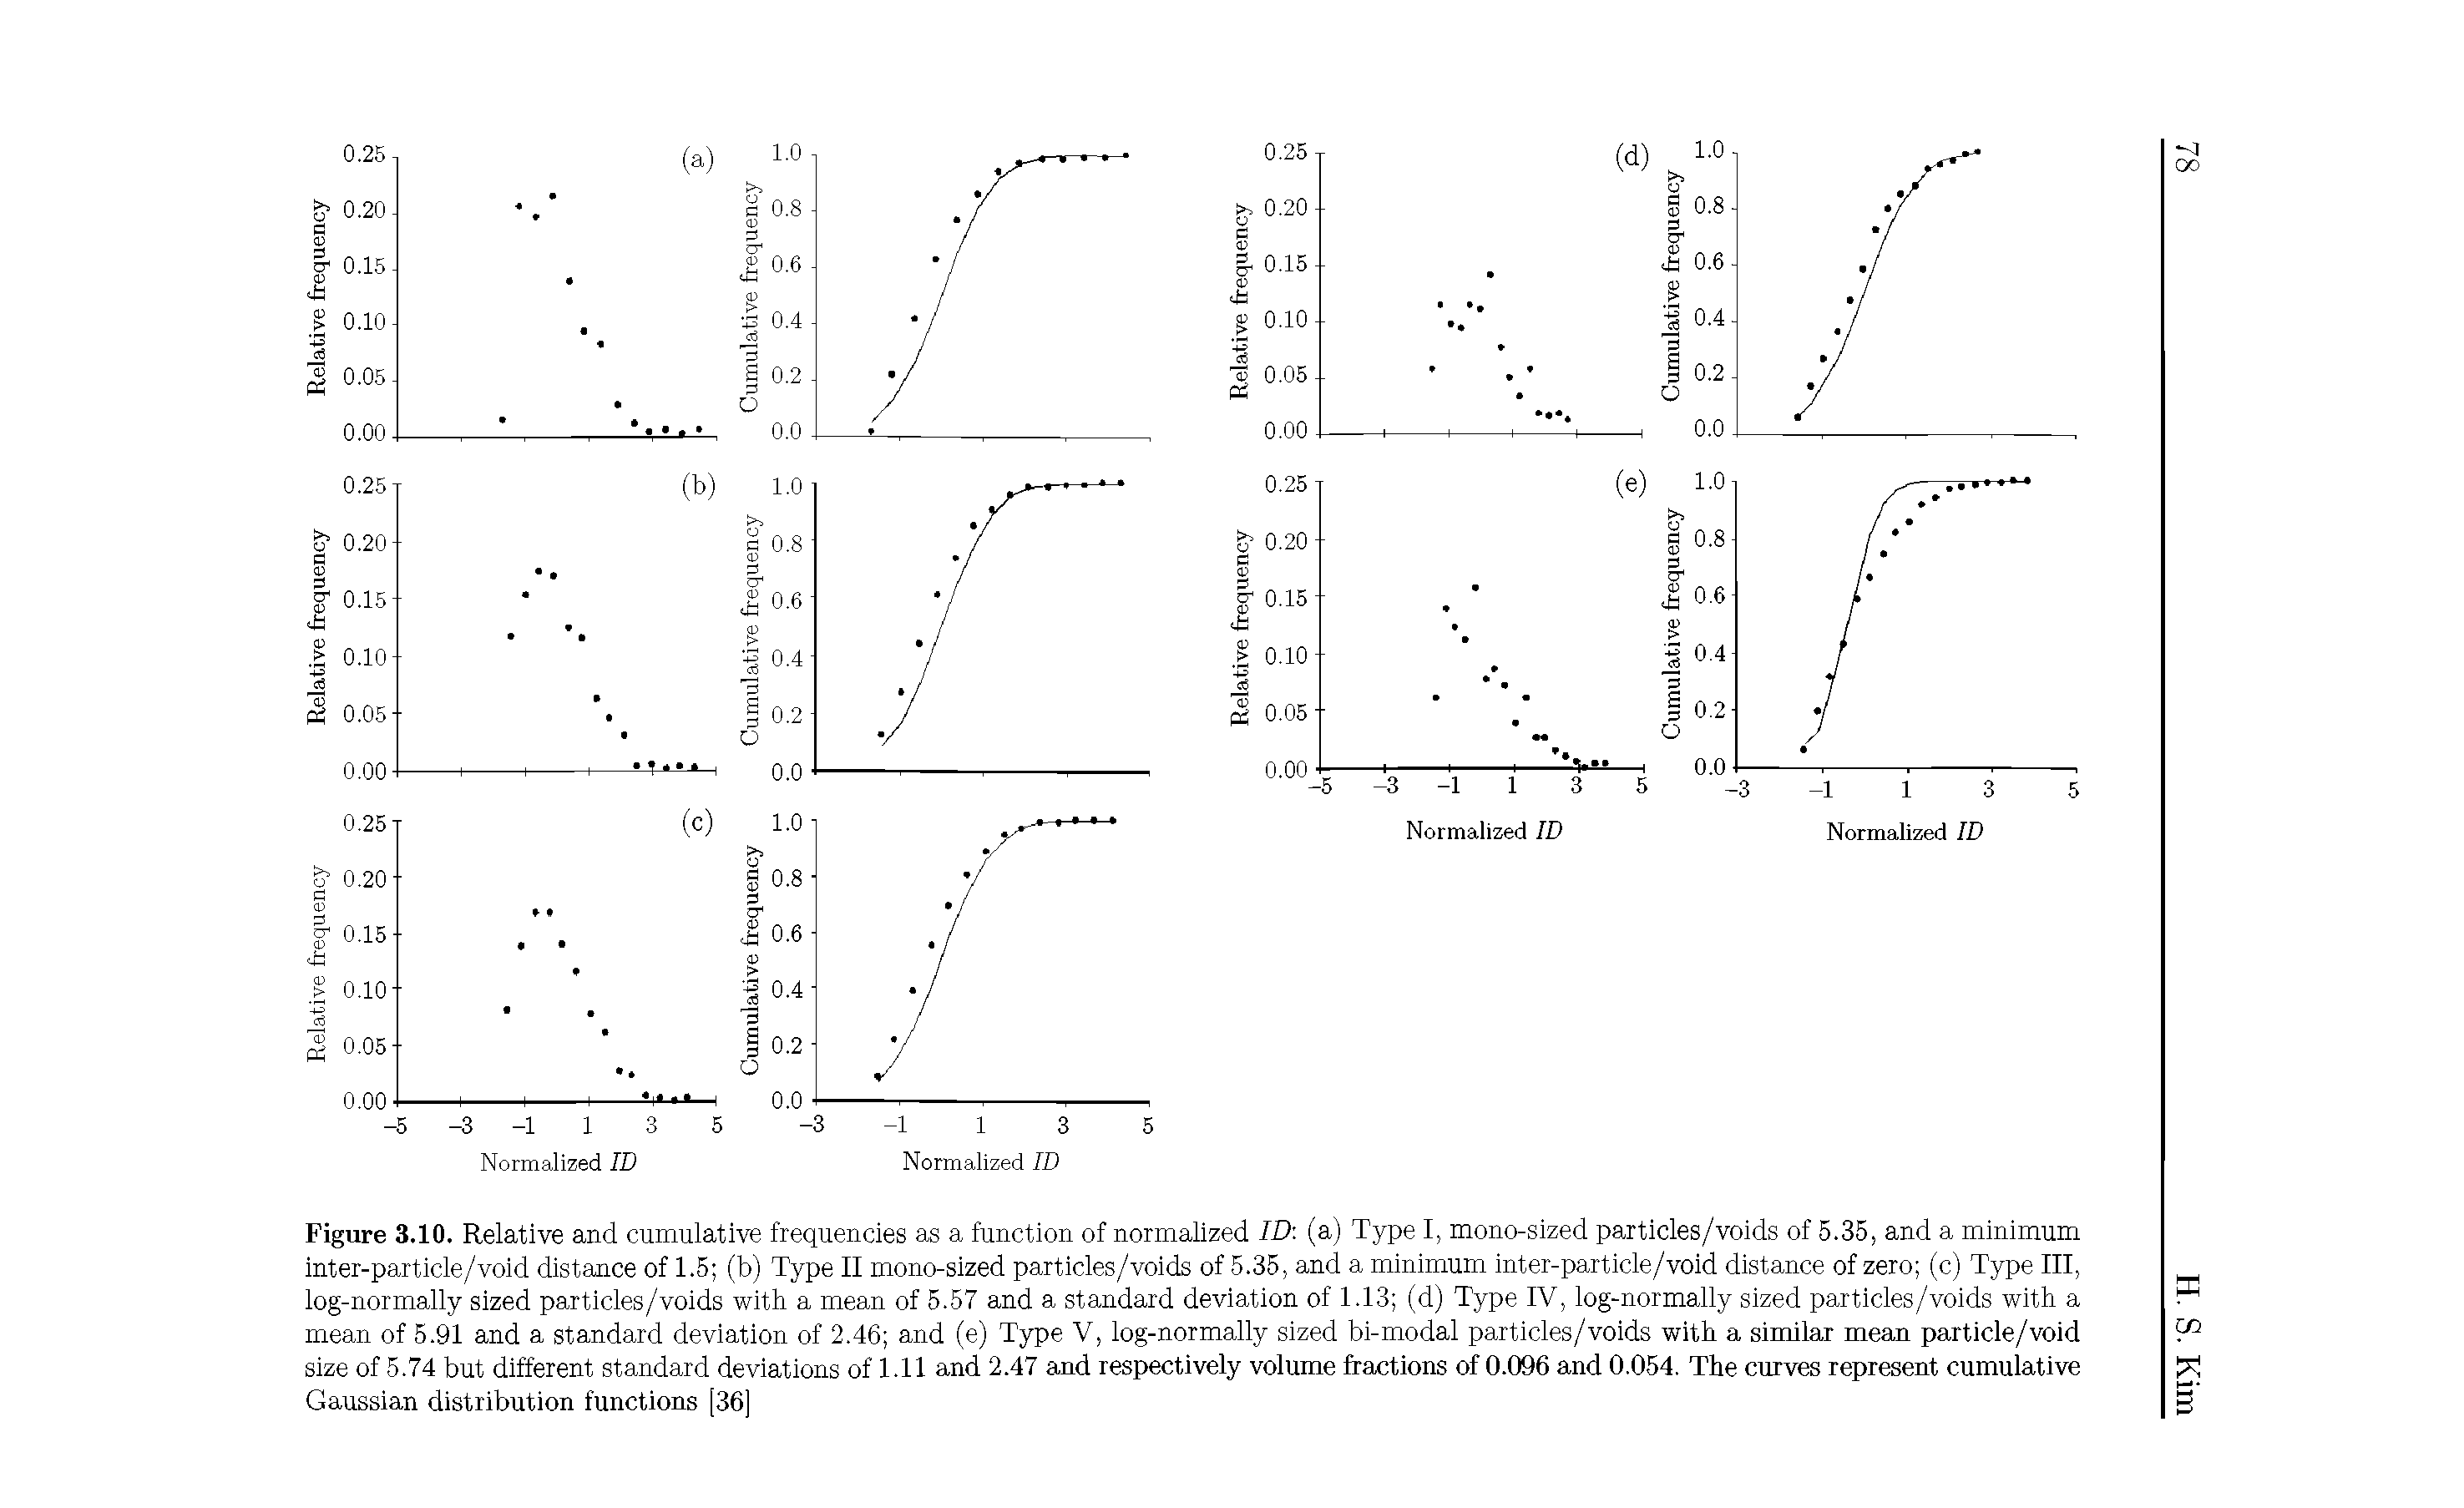 Figure 3.10. Relative and cumulative frequencies as a function of normalized ID (a) Type I, mono-sized particles/voids of 5.35, and a minimum inter-particle/void distance of 1.5 (b) Type II mono-sized particles/voids of 5.35, and a minimum inter-particle/void distance of zero (c) Type III, log-normally sized particles/voids with a mean of 5.57 and a standard deviation of 1.13 (d) Type IV, log-normally sized particles/voids with a mean of 5.91 and a standard deviation of 2.46 and (e) Type V, log-normally sized bi-modal particles/voids with a similar mean particle/void size of 5.74 but different standard deviations of 1.11 and 2.47 and respectively volume fractions of 0.096 and 0.054. The curves represent cumulative Gaussian distribution functions [36]...